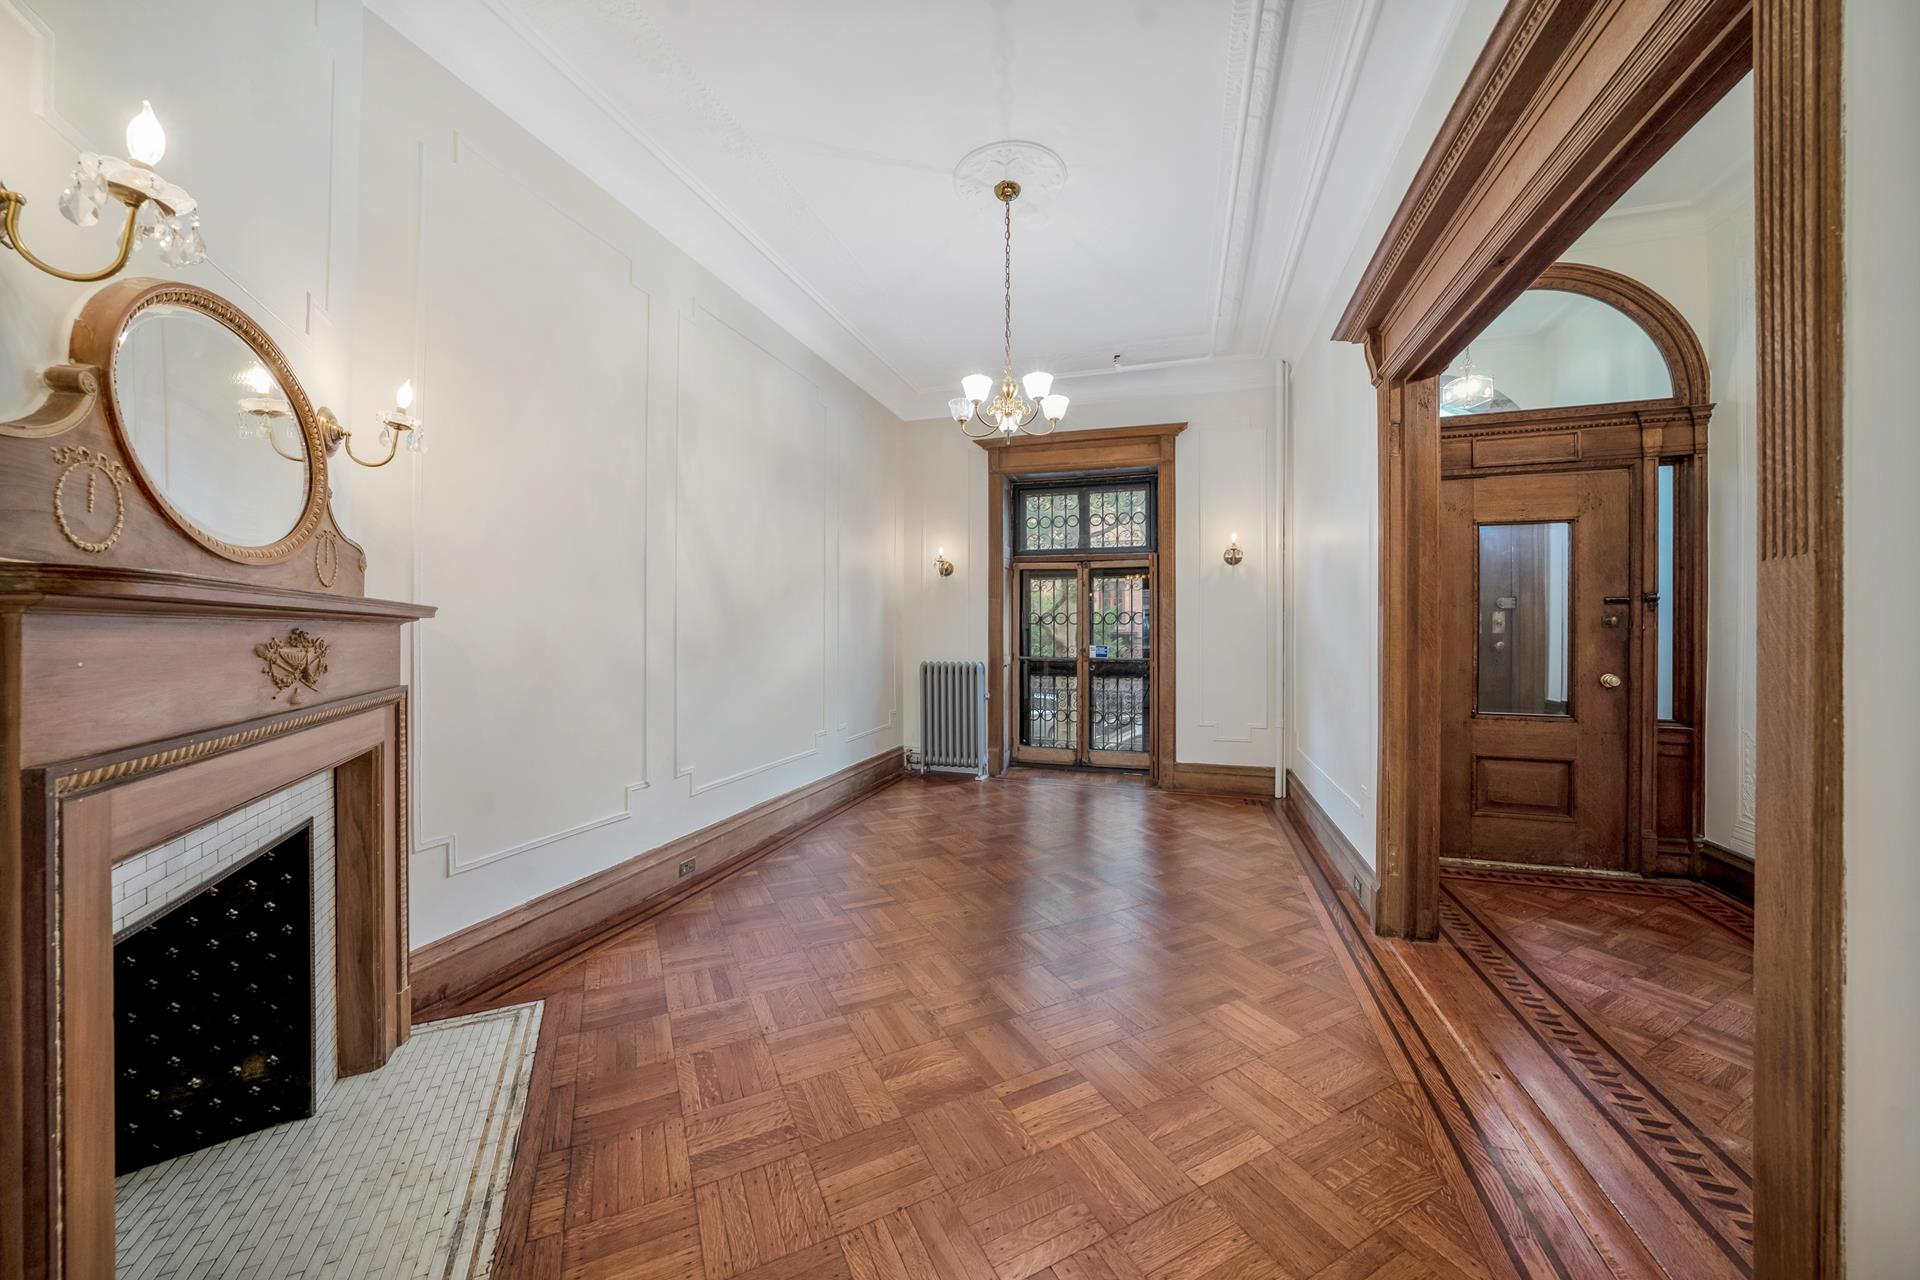 208 West 139th Street, Central Harlem, Upper Manhattan, NYC - 5 Bedrooms  3.5 Bathrooms  8 Rooms - 